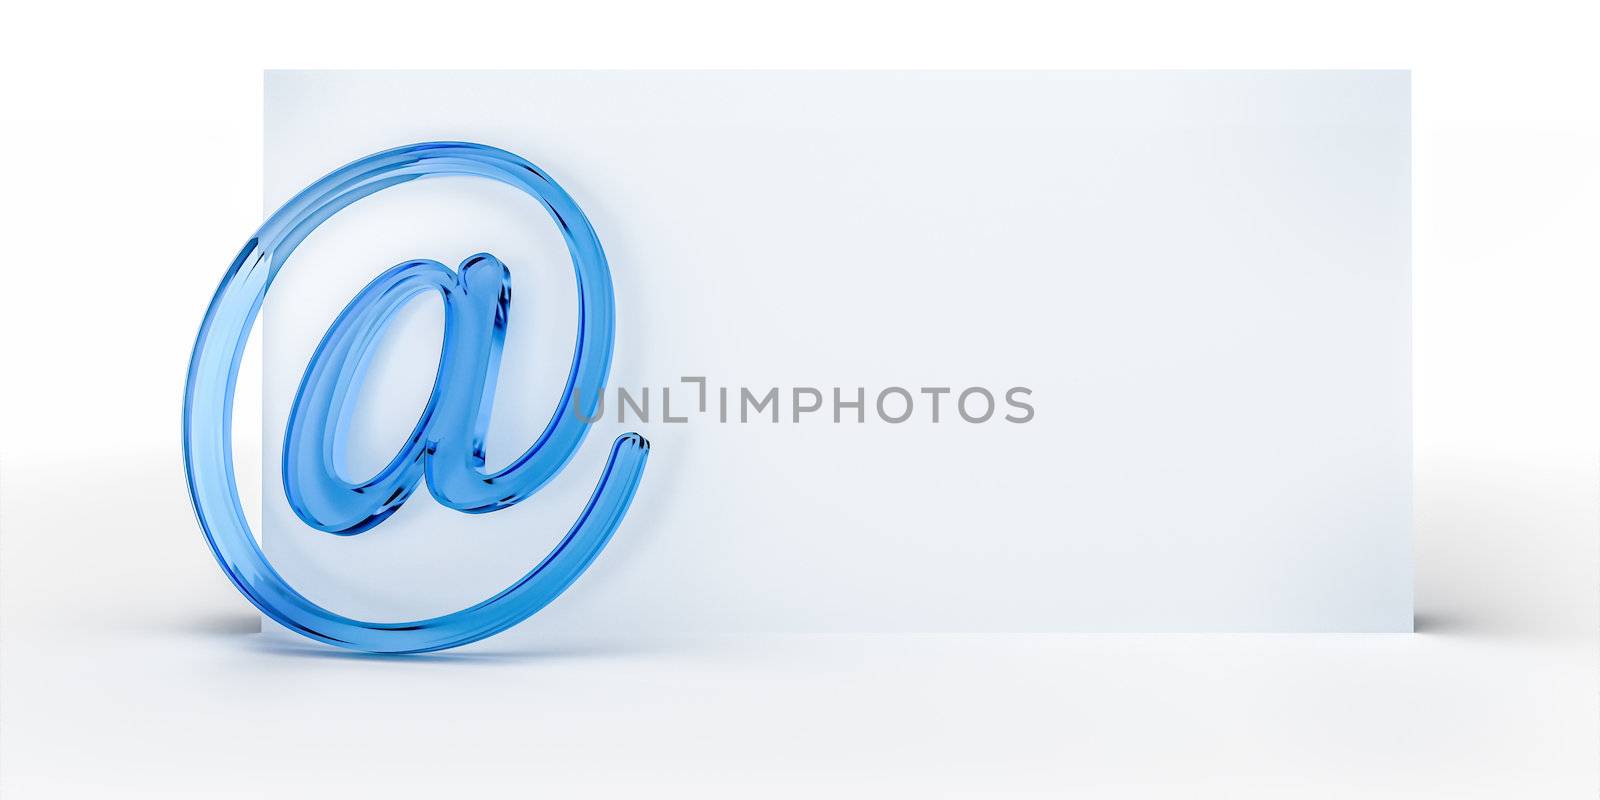 An image of a nice email sign with space for your content